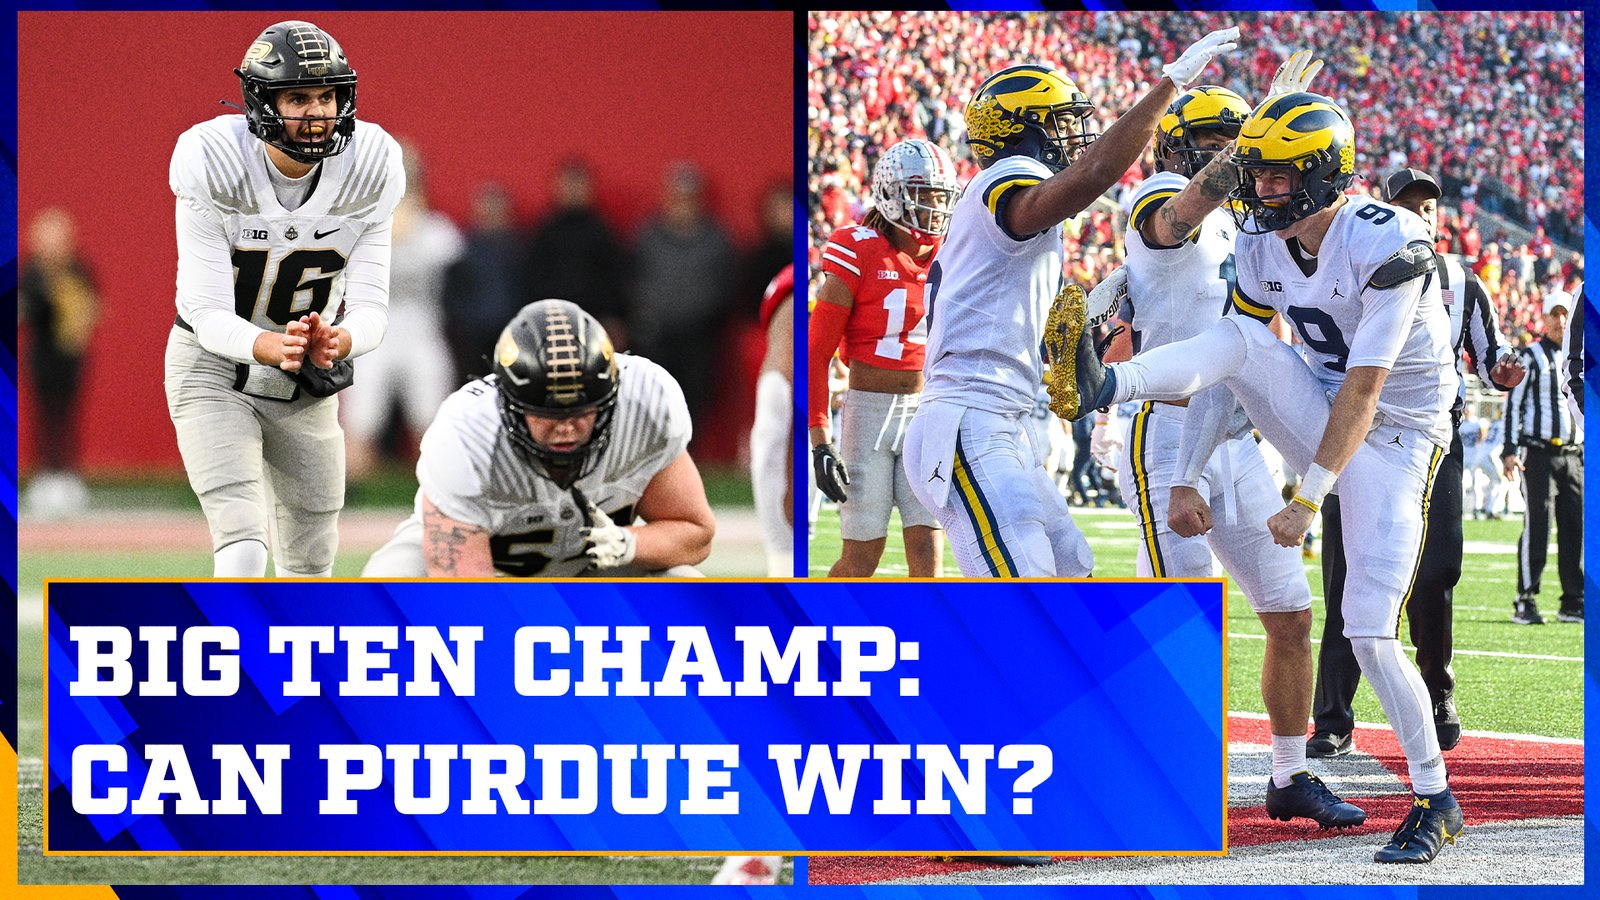 Can Purdue win another ranked showdown vs. Michigan?